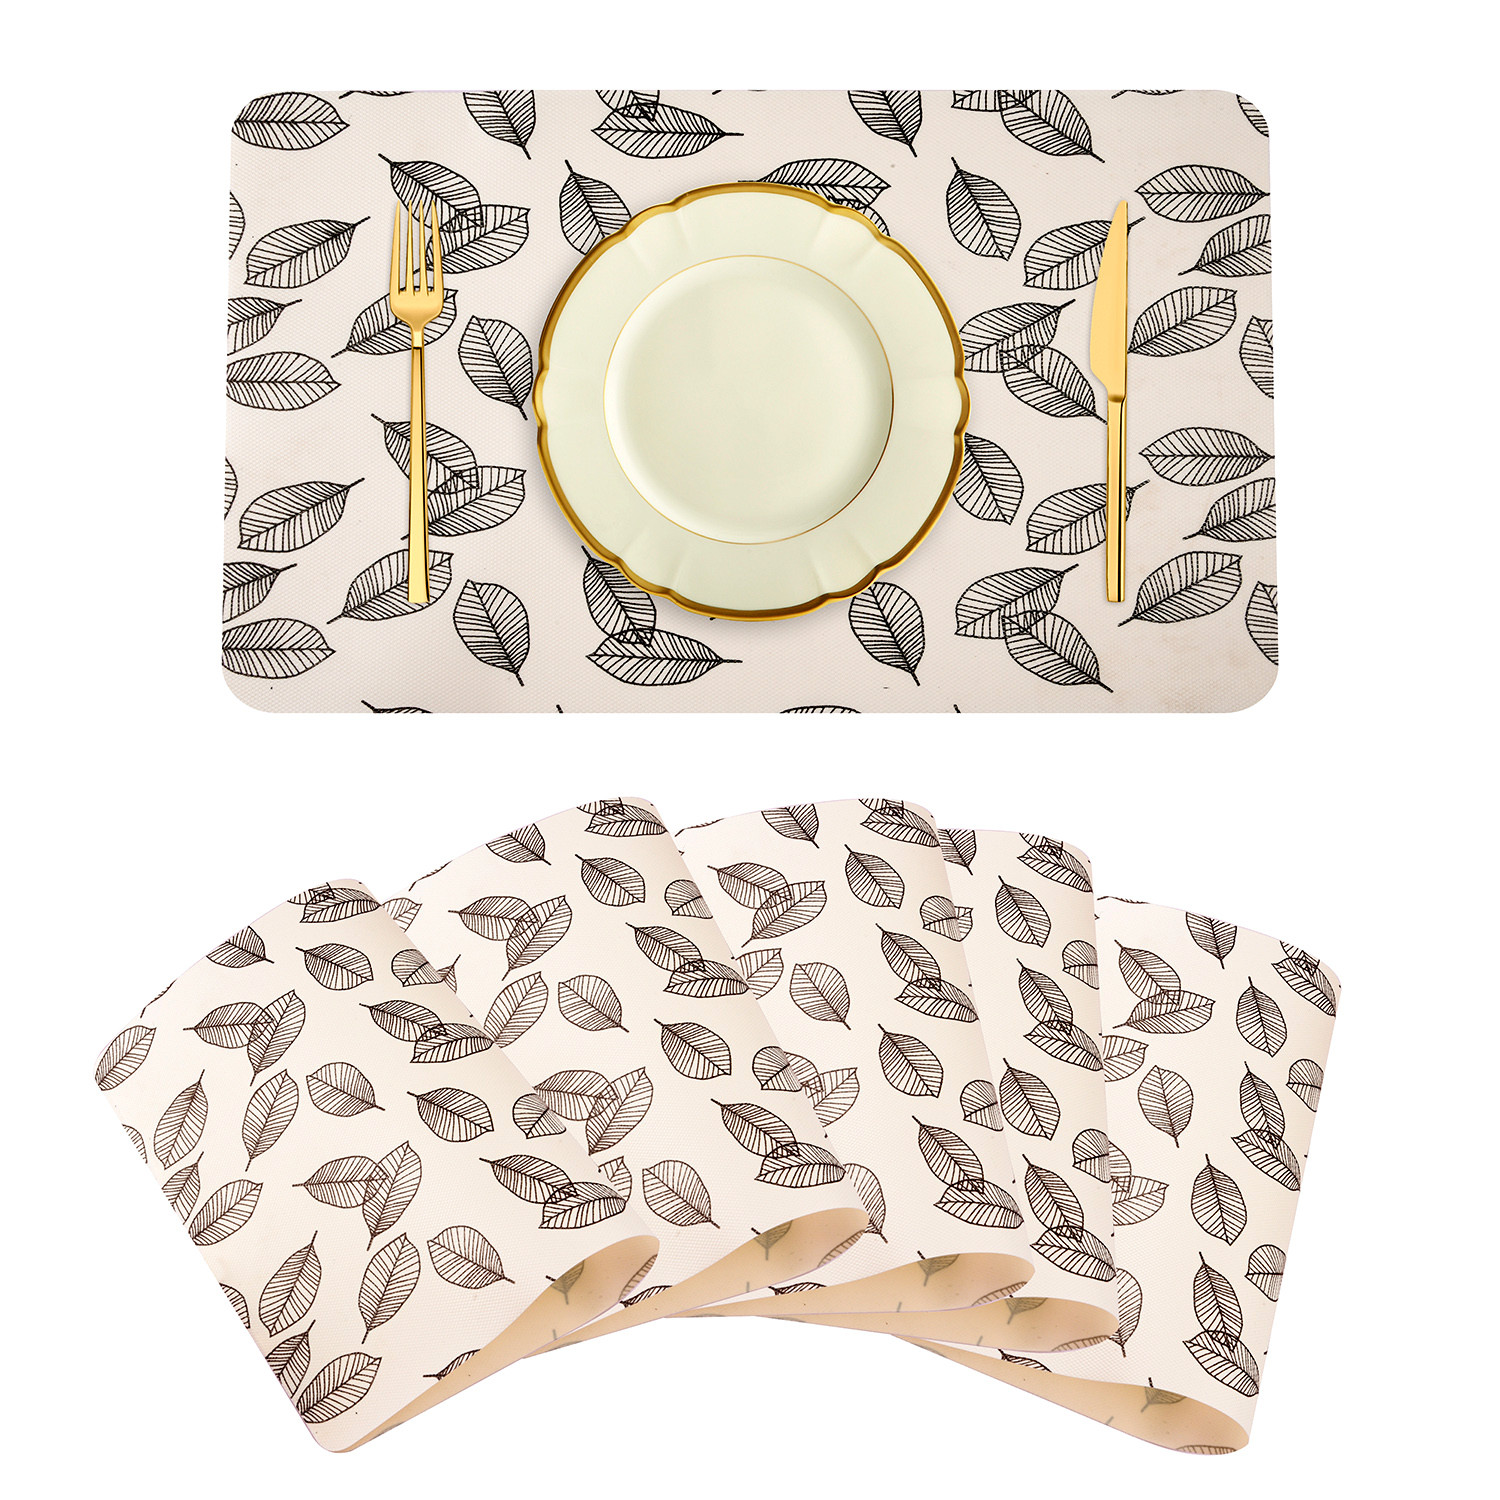 Kuber Industries Placemat | Placemats for Dining Room | Anti-Slip Table Mat Set | Placemats for Kitchen Table | Dining Table Placemats | Leaf-Design Placemat | 6 Piece Set | Cream